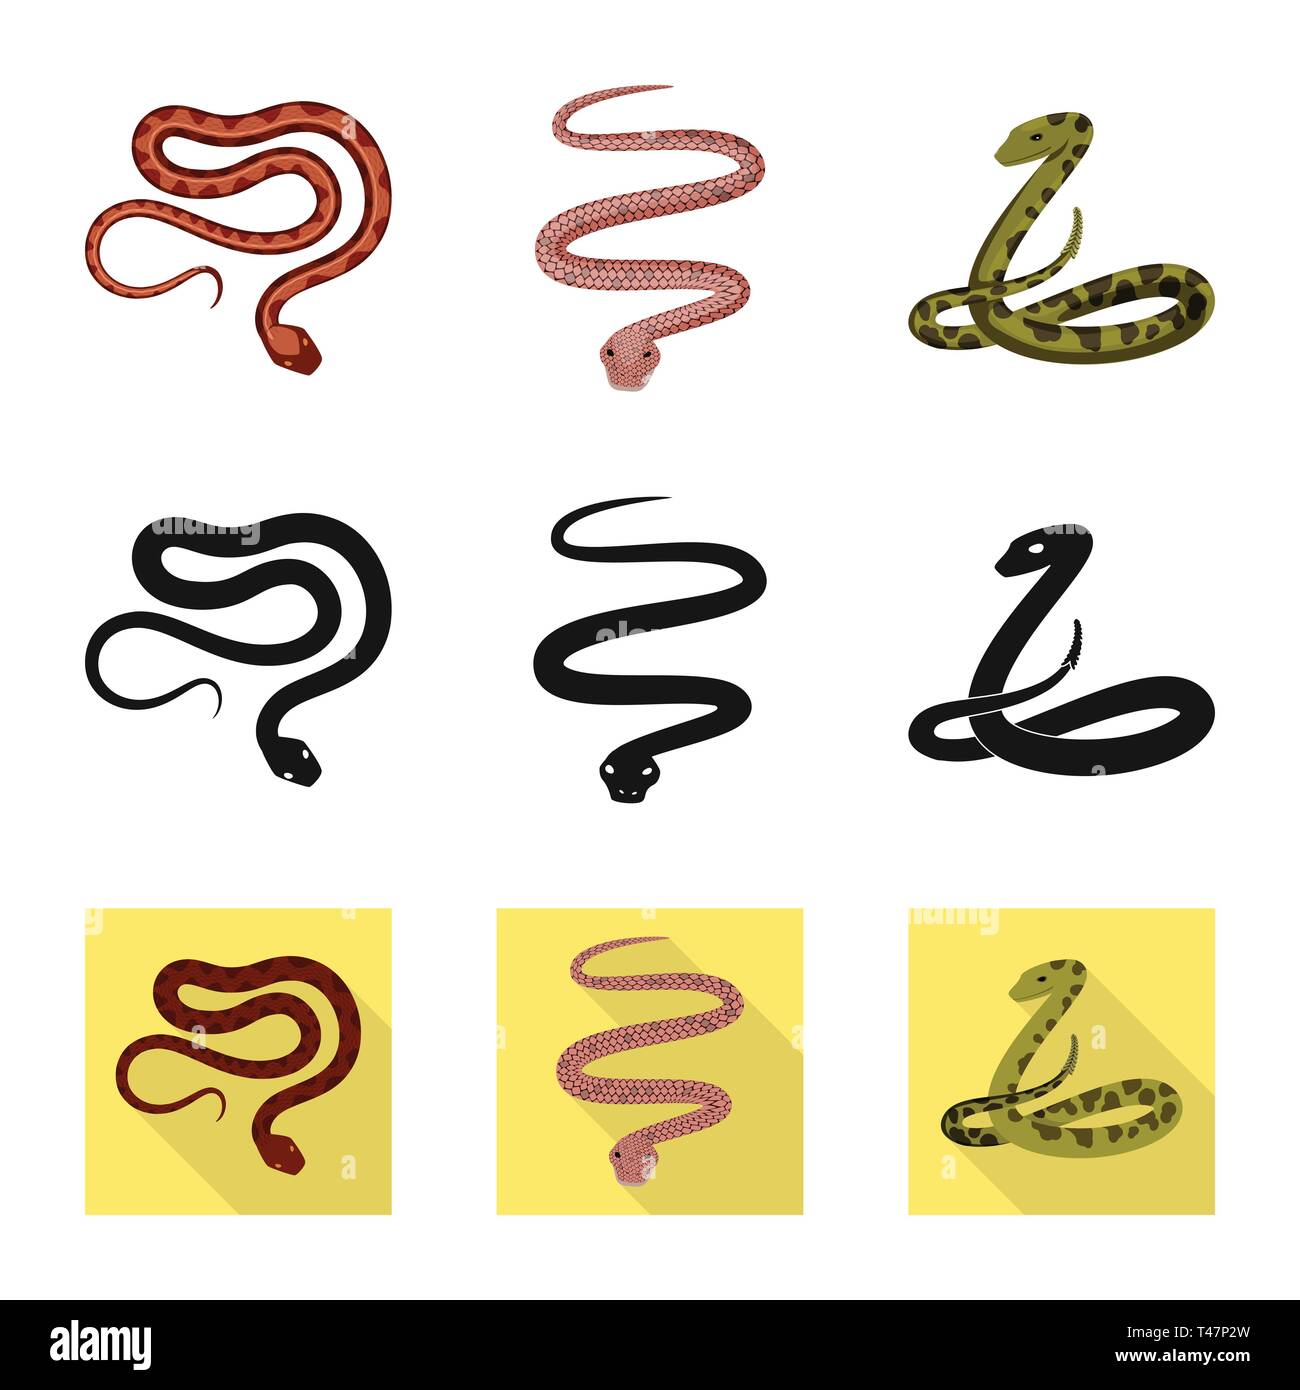 viper,snake,tail,python,forest,spiral,animal,seamless,leather,green ...